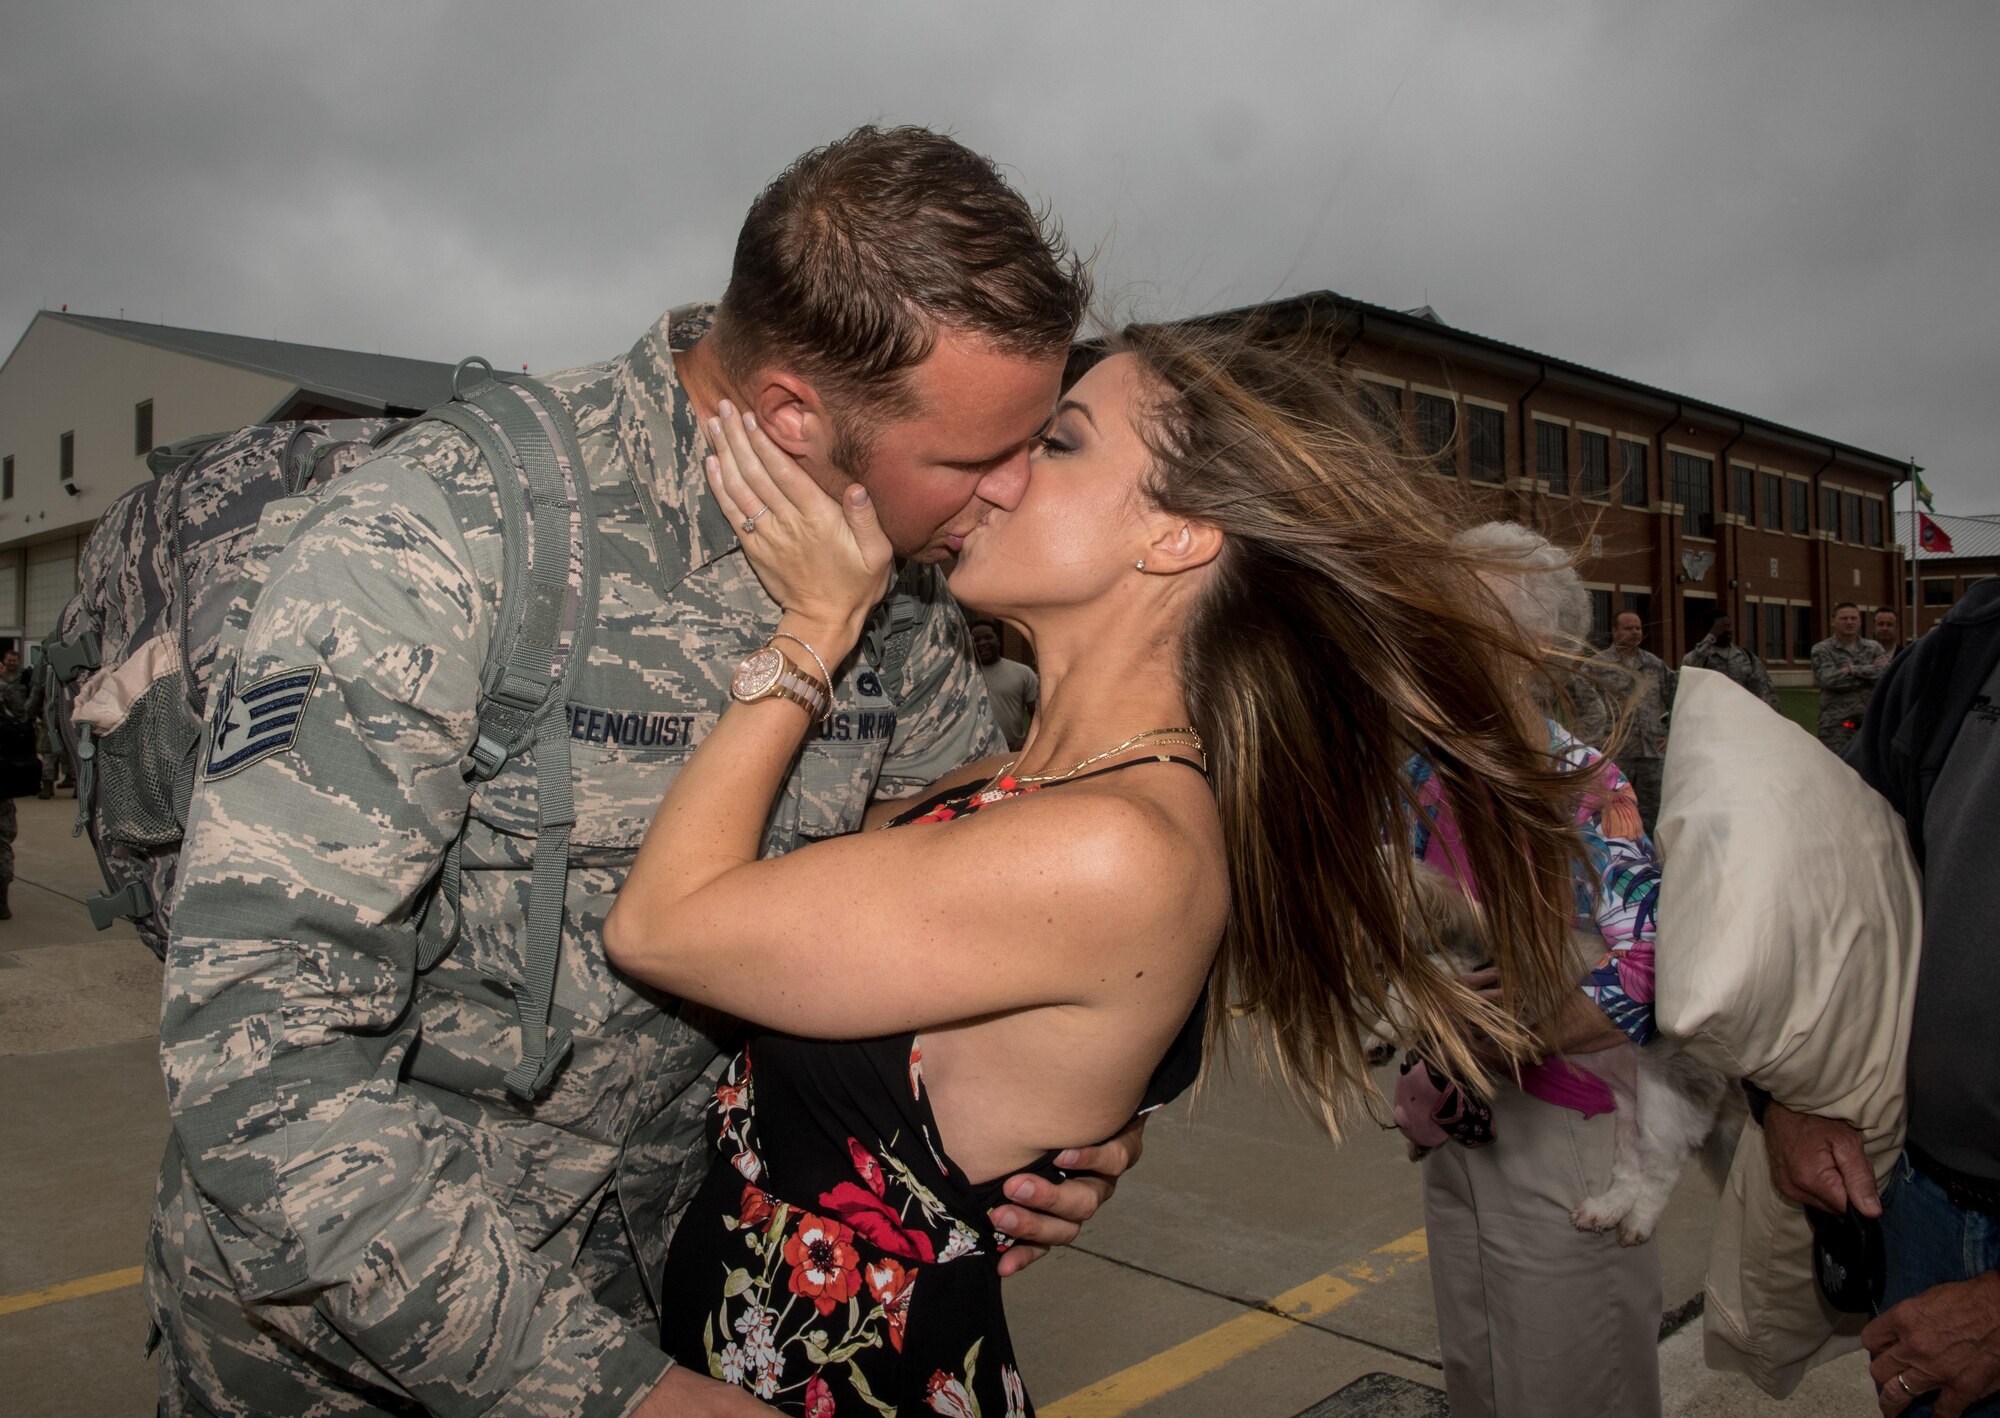 Virginia Air National Guard Staff Sgt. Jeff Greenquist, 
192nd Maintenance Squadron low observable technician, kisses his fiancé  Ashley Branham, after she accepted his proposal to marry her at Joint Base Langley-Eustis, Va., Oct. 12, 2017. Greenquist just returned from a six-month deployment to the Middle East with the 1st Fighter Wing. (U.S. Air Force photo by Staff Sgt. Carlin Leslie)